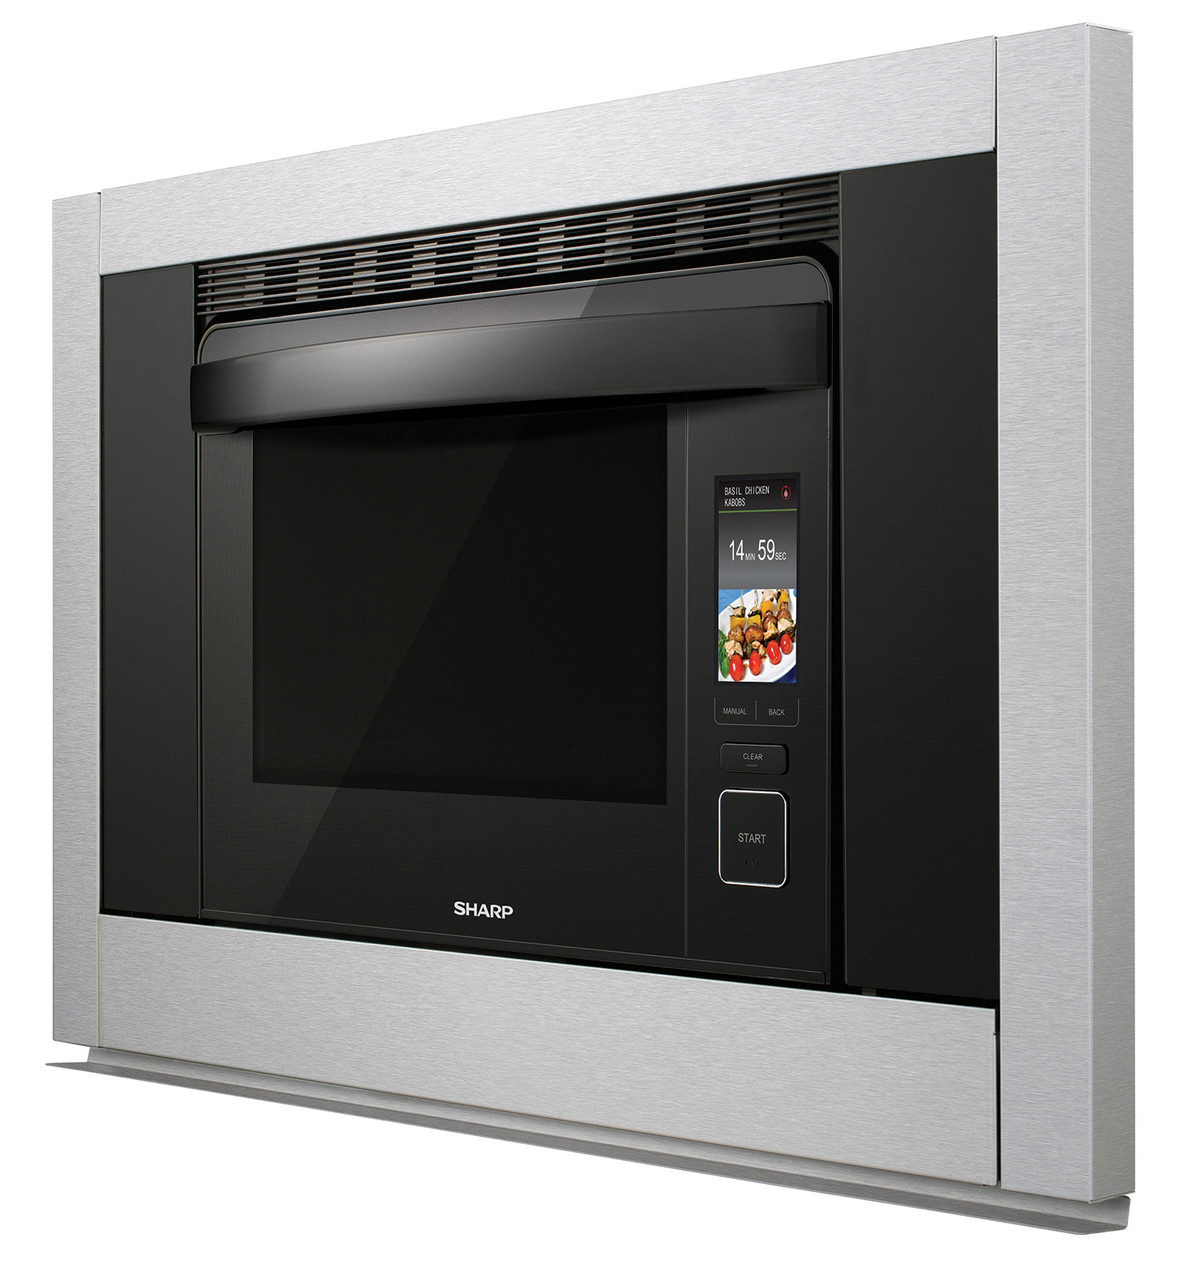 1.1 cu. ft. Supersteam+ Superheated Steam and Convection Built-in Wall Oven (SSC3088AS) – left side view